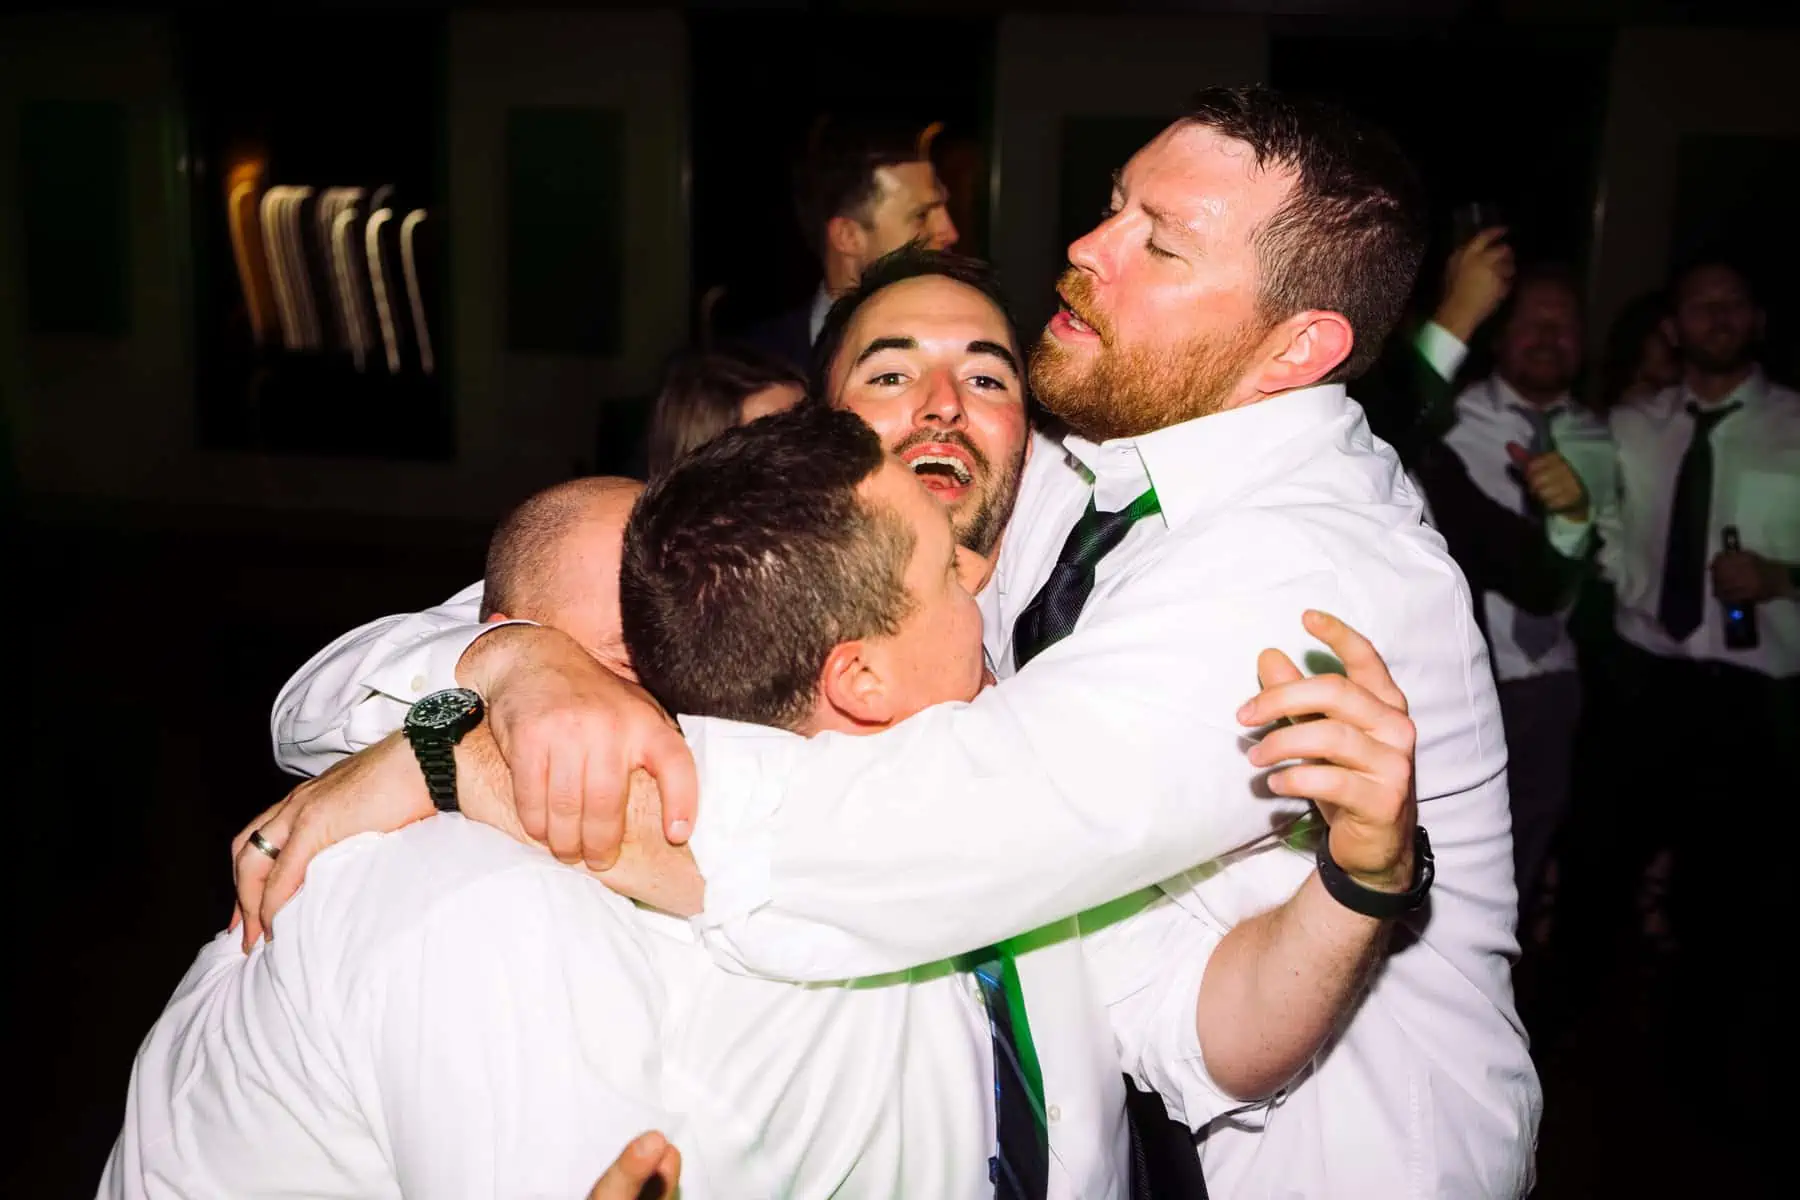 A group of men hugging each other on the dance floor.